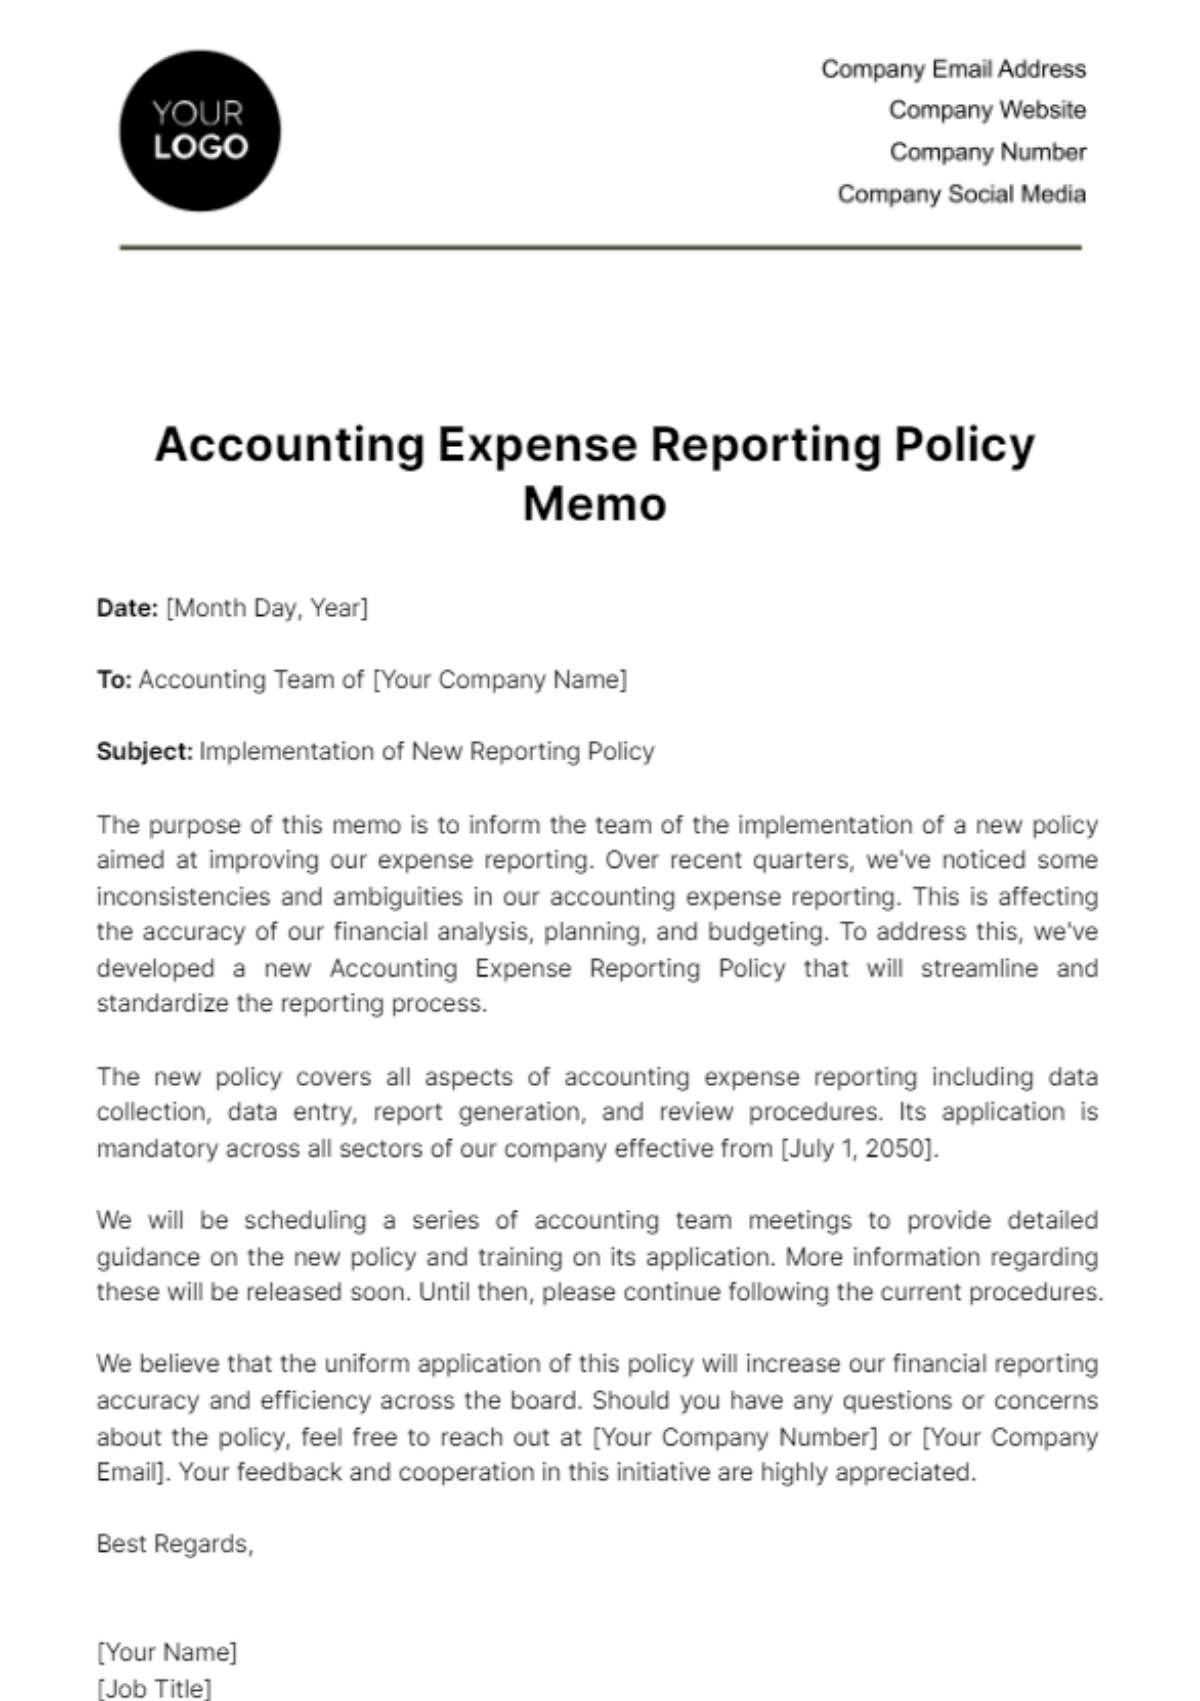 Accounting Expense Reporting Policy Memo Template